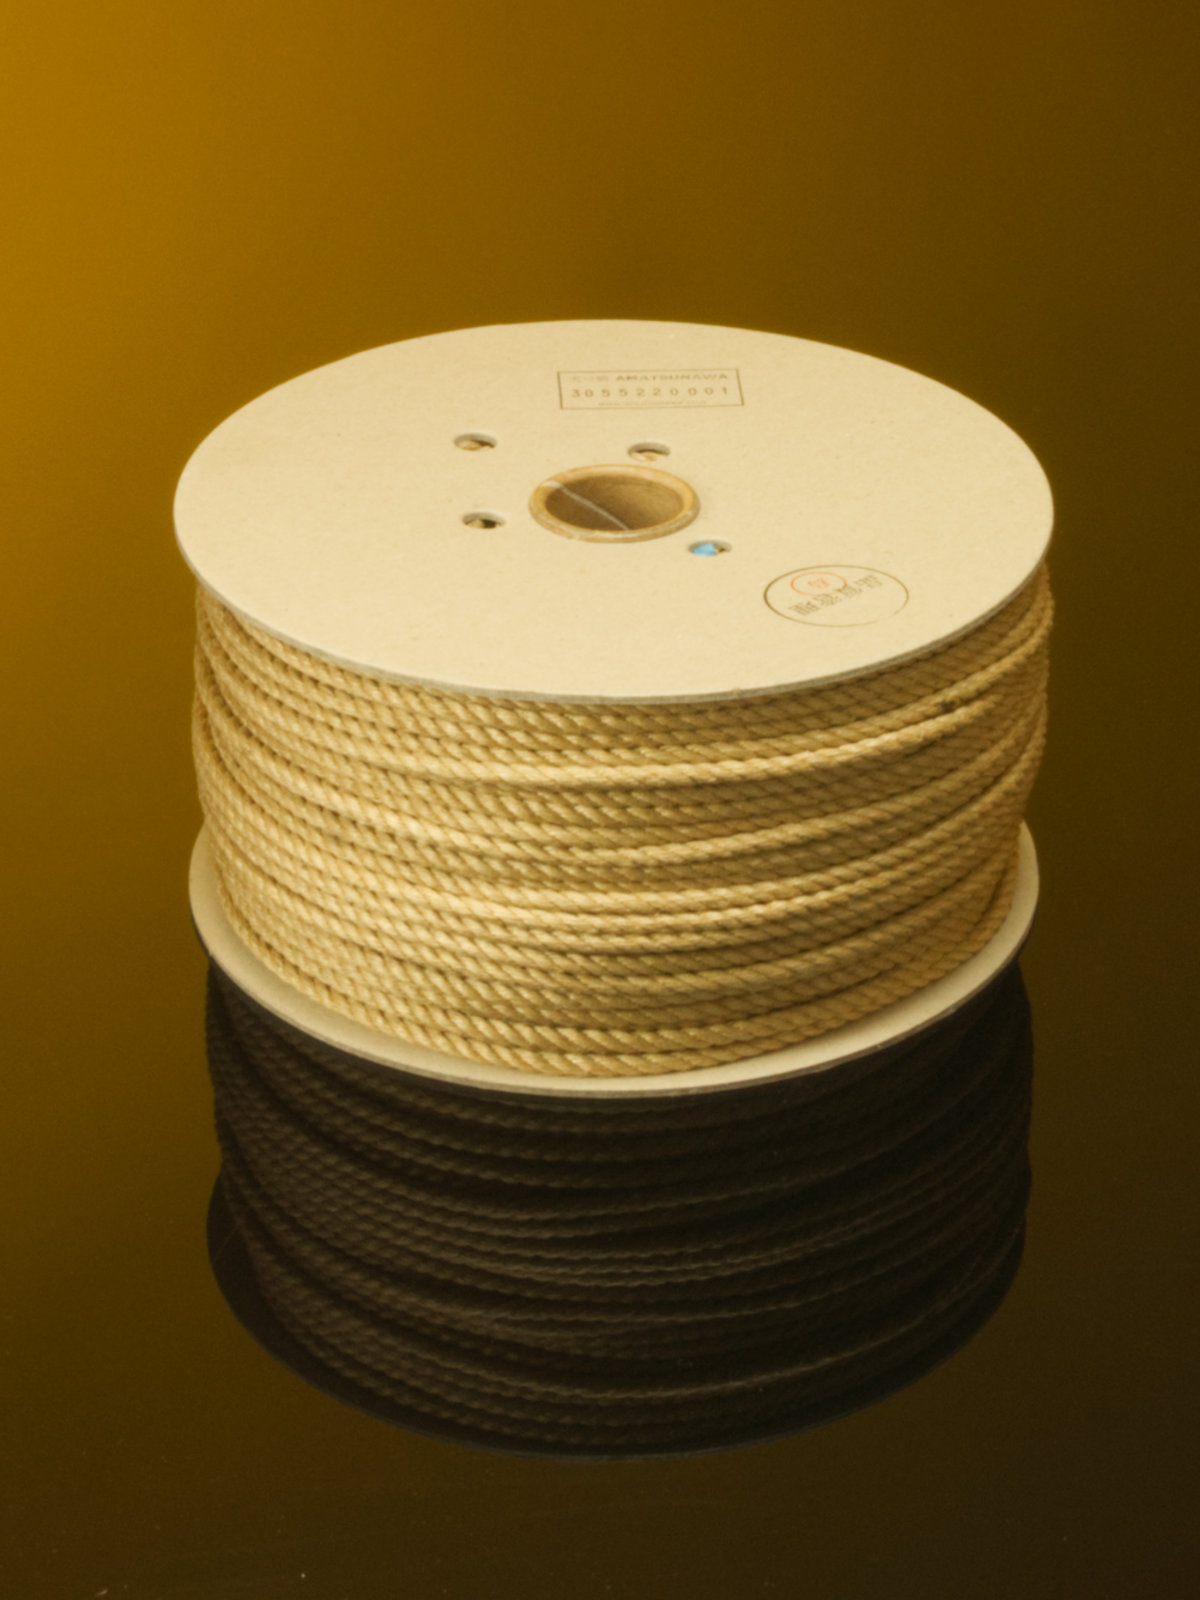 ∅ 5.5mm JOUYOKU MIDI-ROLL, ~3kg, 165m, ready-for-use Japanese-made jute rope, JBO-free